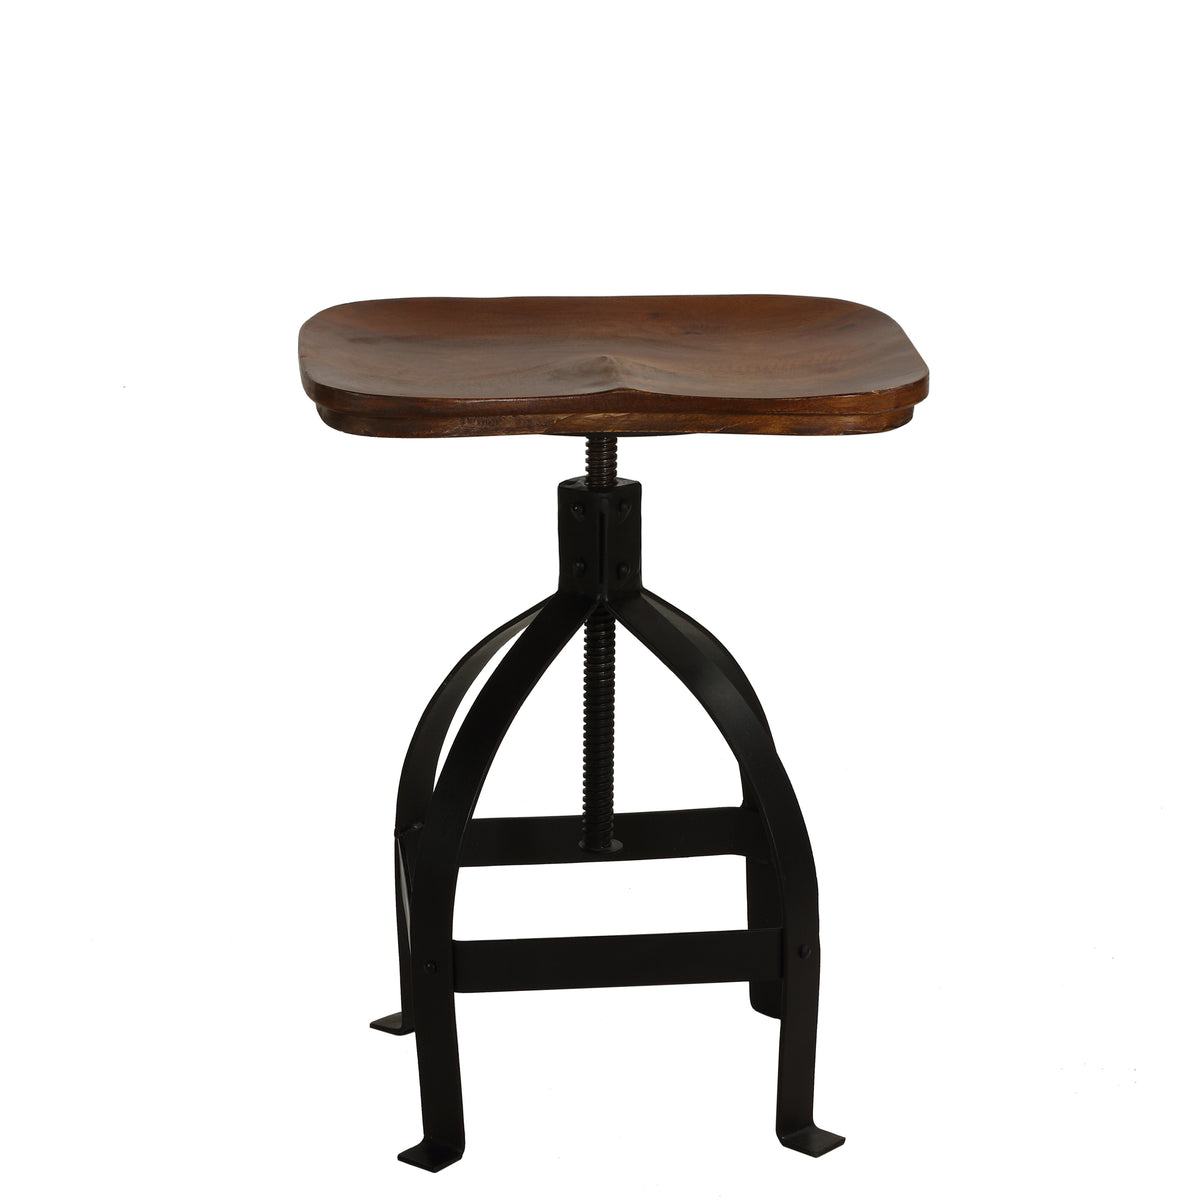 Bare Decor Keg Counter Swivel Stool in Solid Wood and Black Metal, Adjustable Height